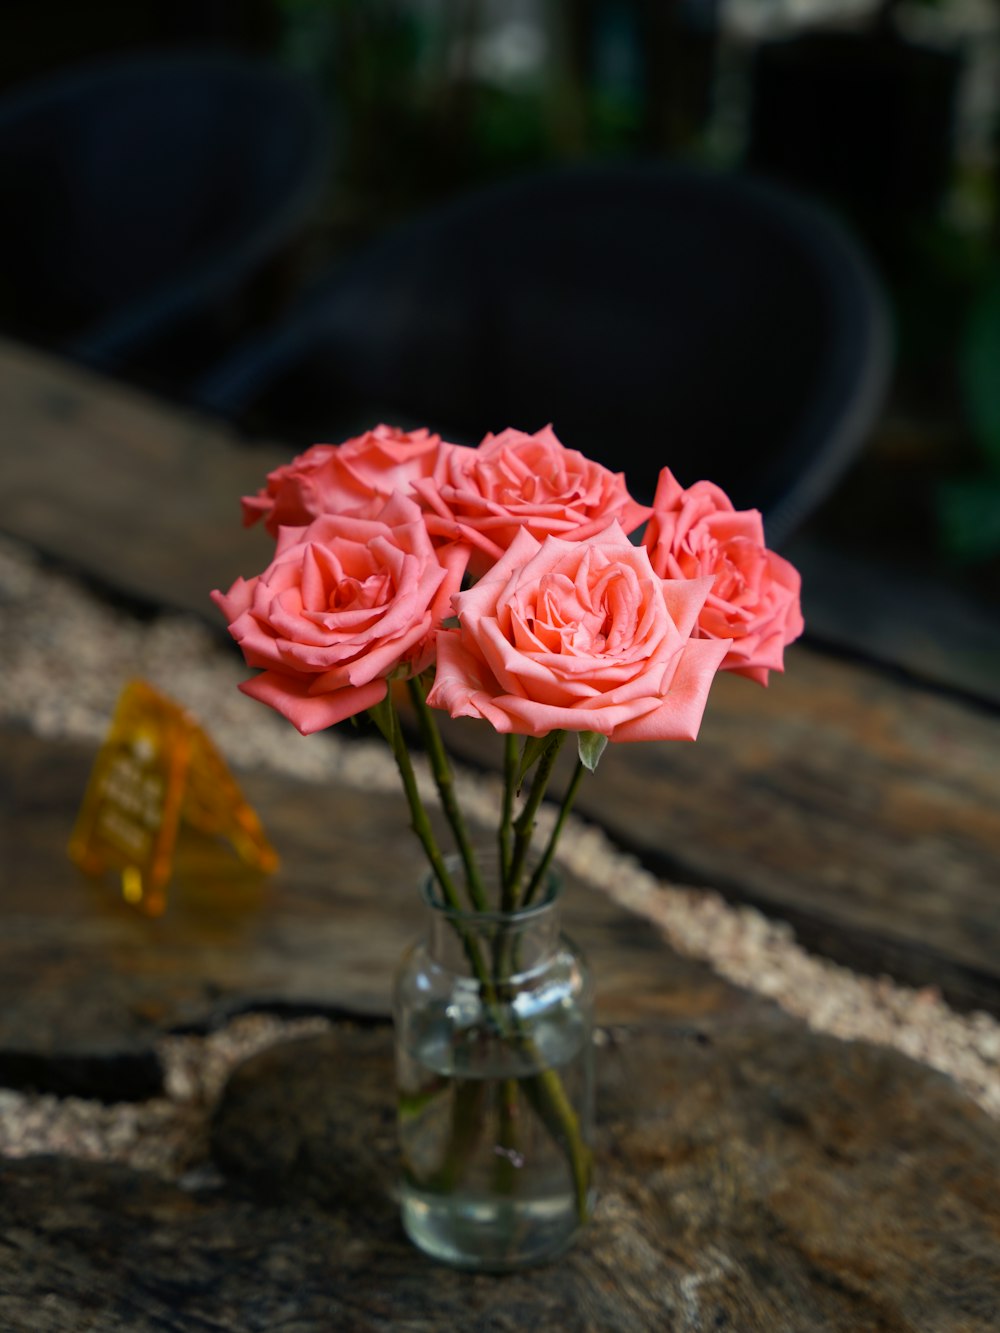 a vase filled with pink roses on top of a wooden table